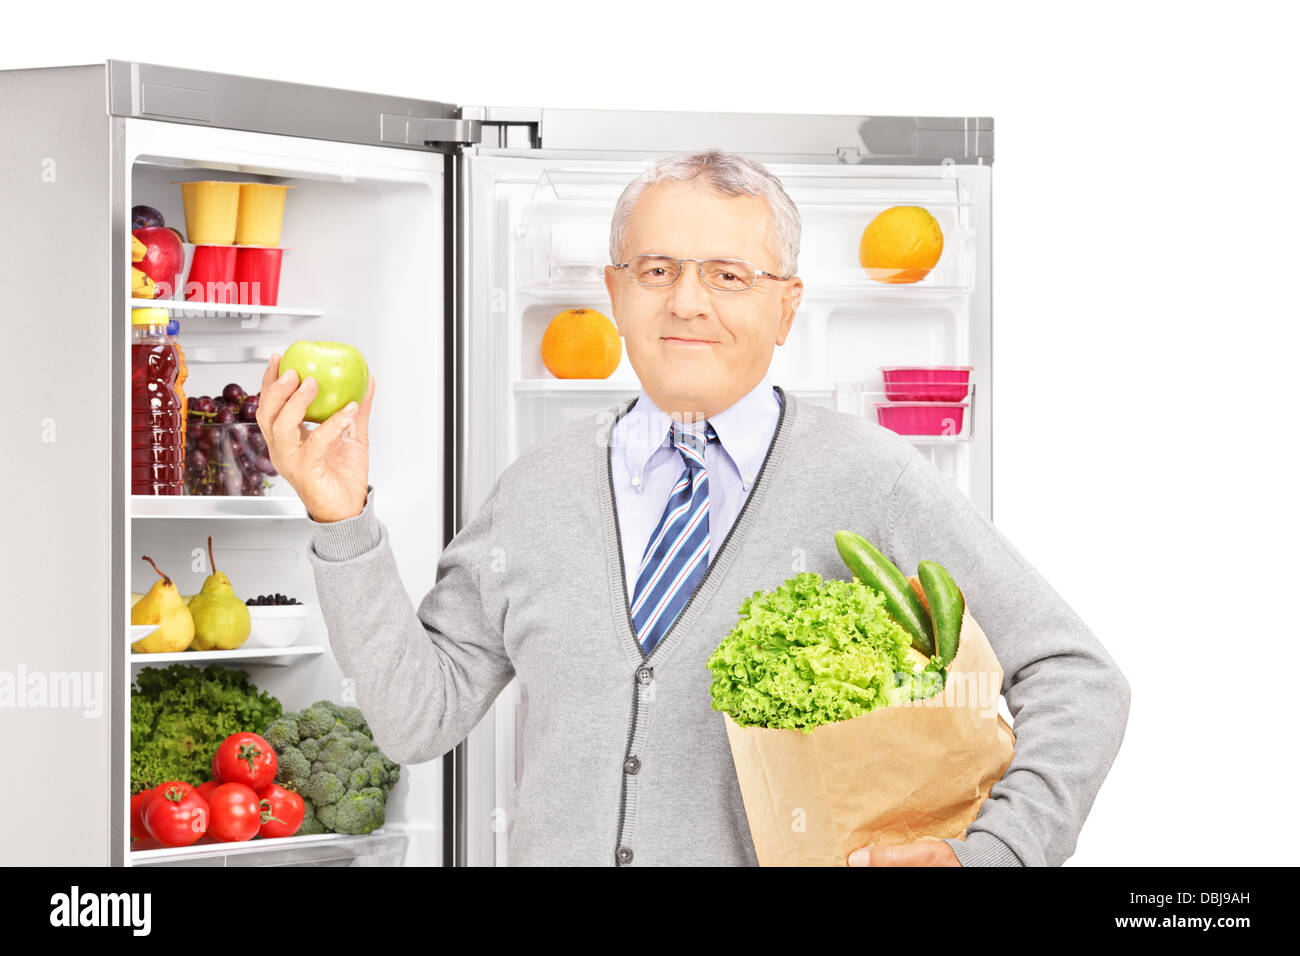 Smiling mature man holding a paper bag next to a refrigerator full of products Stock Photo